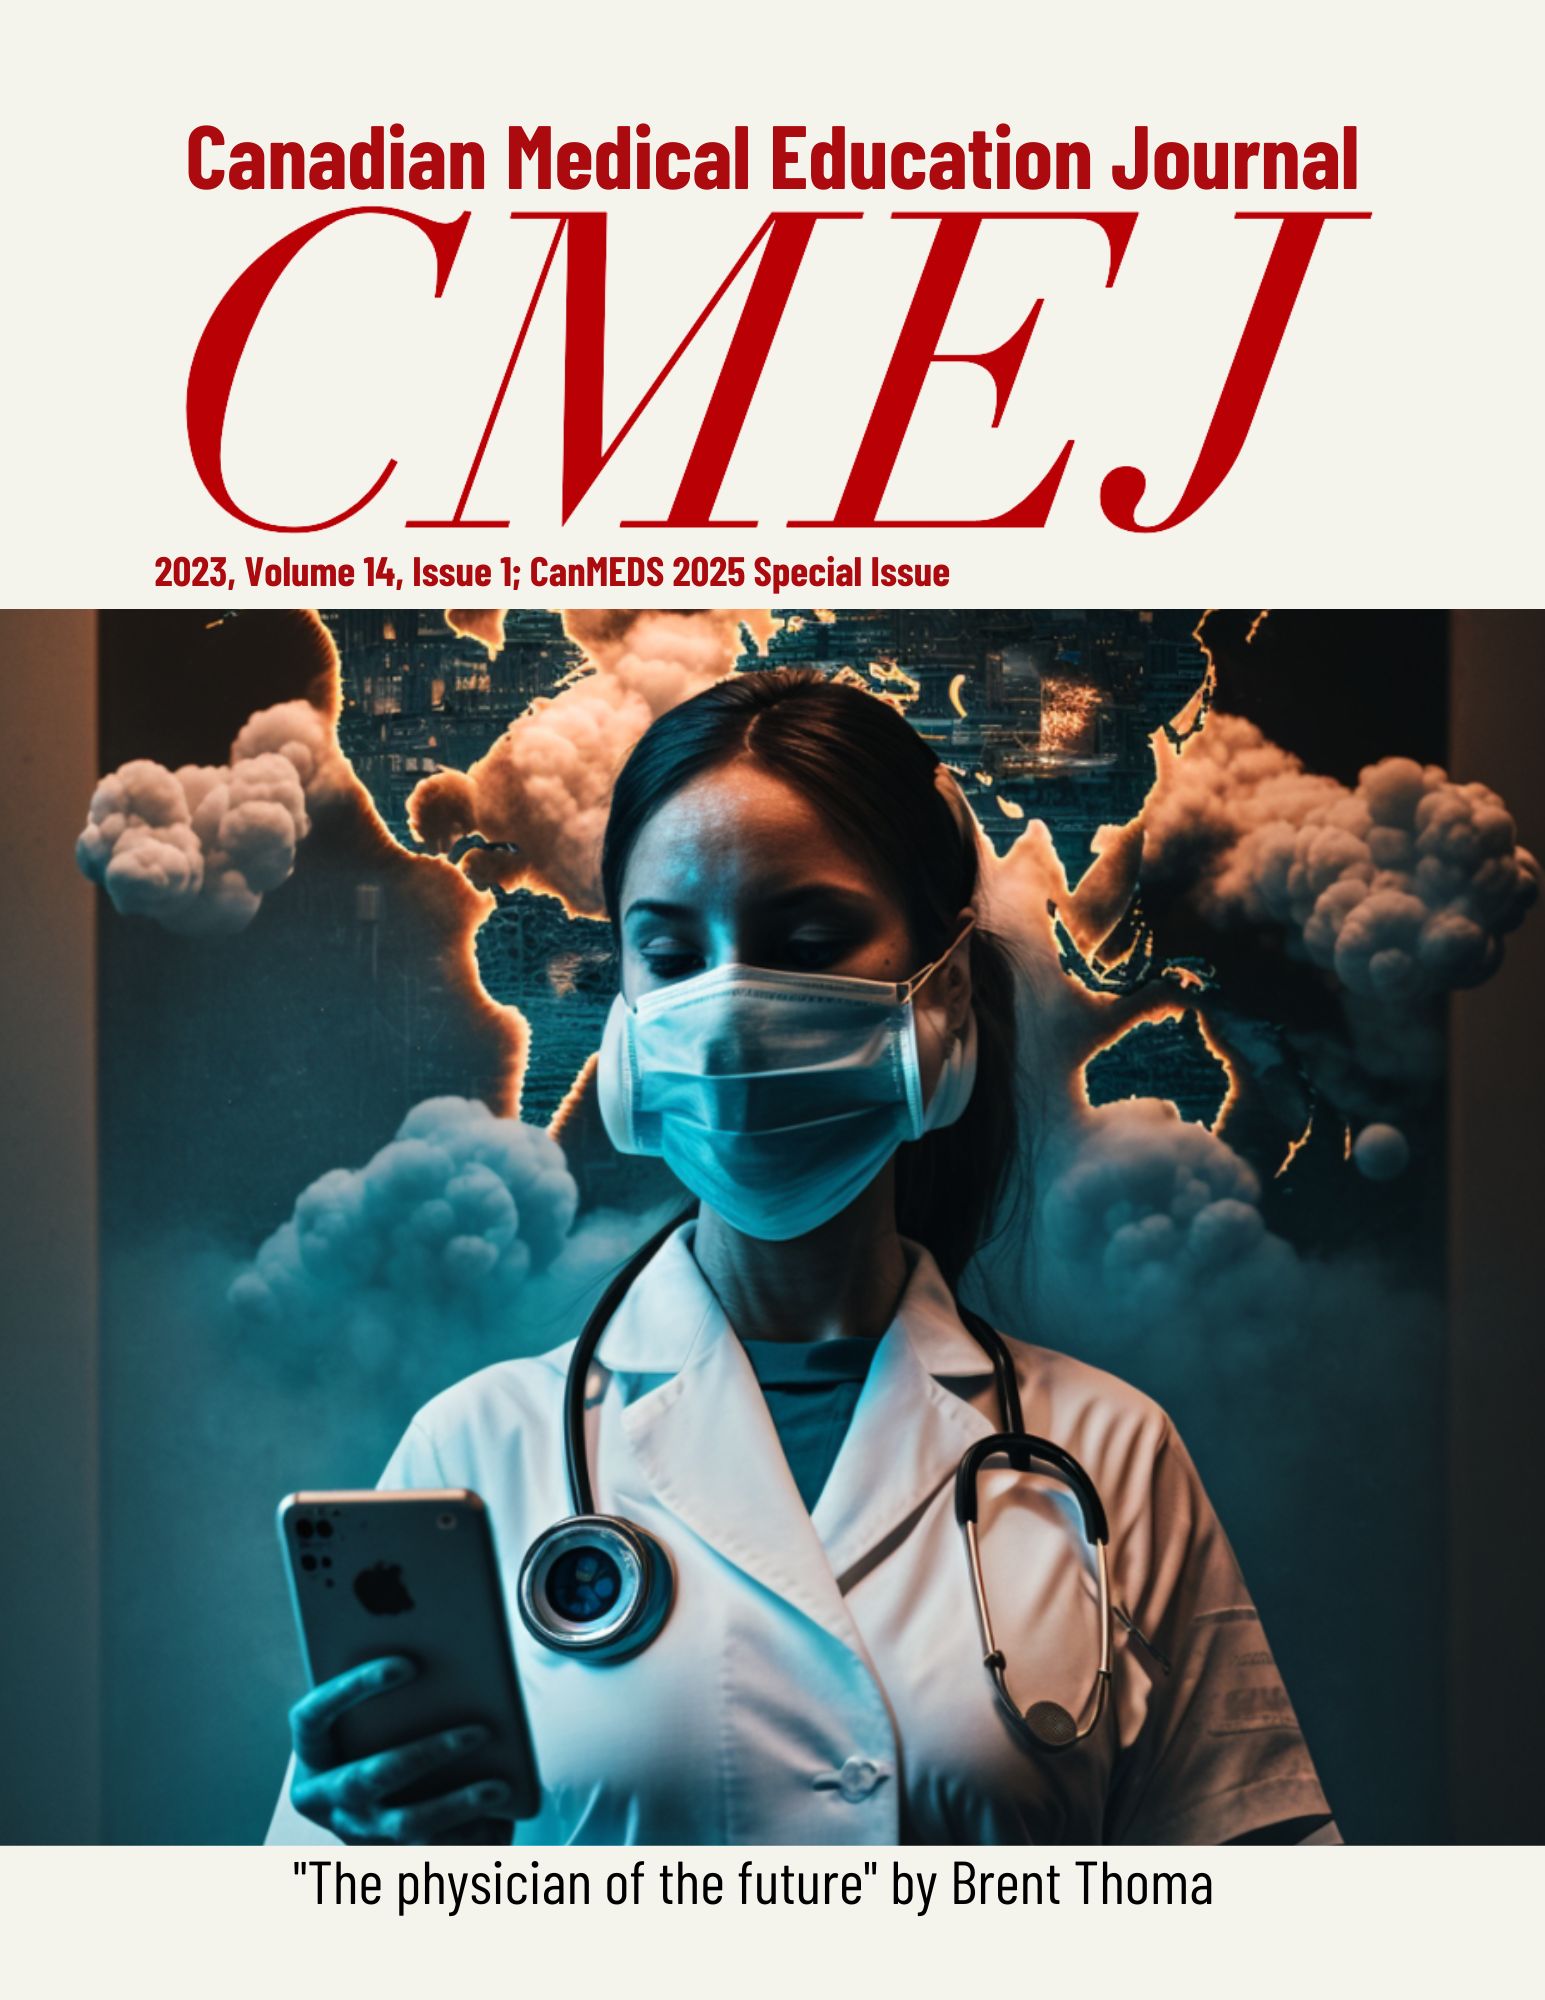 					View Vol. 14 No. 1: CanMEDS 2025 Special Issue
				